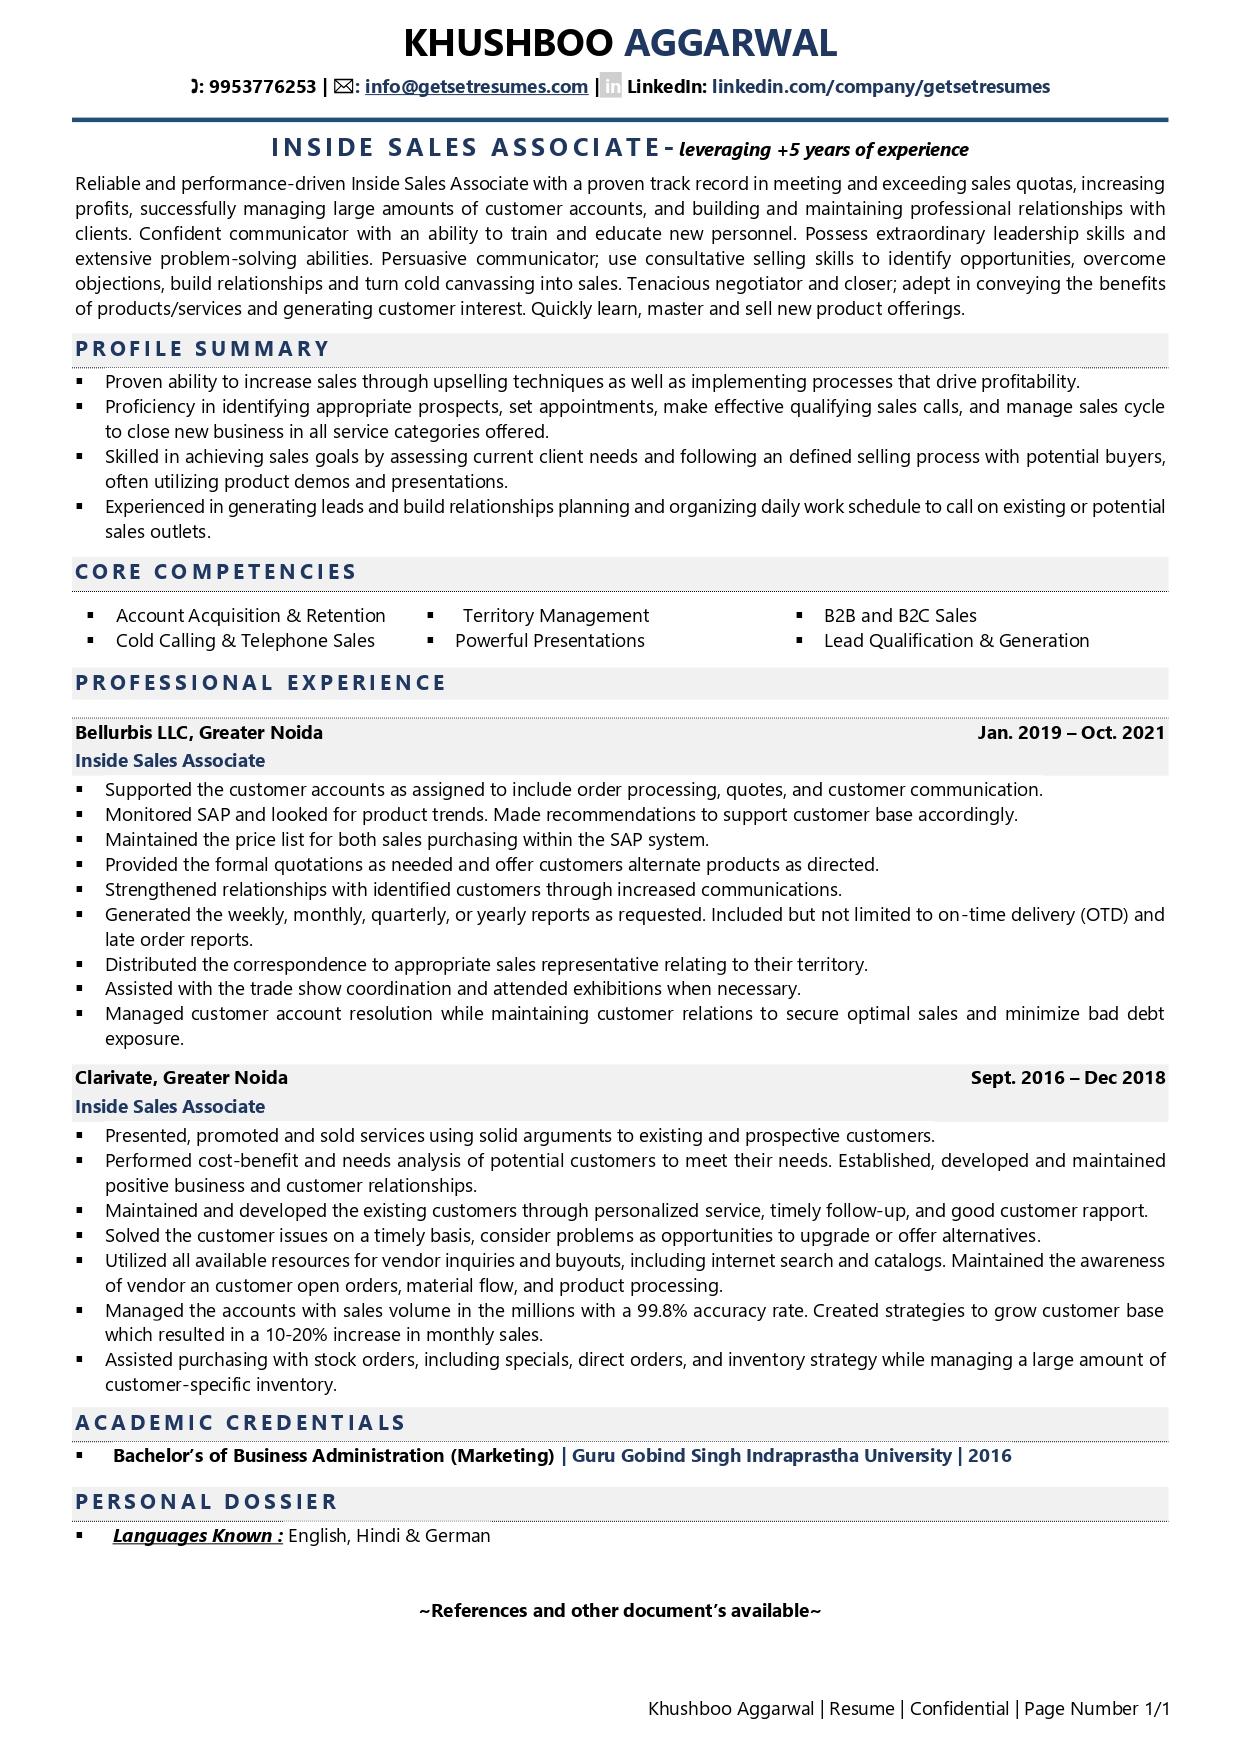 Inside Sales Associate Resume Examples & Template (with job winning tips)